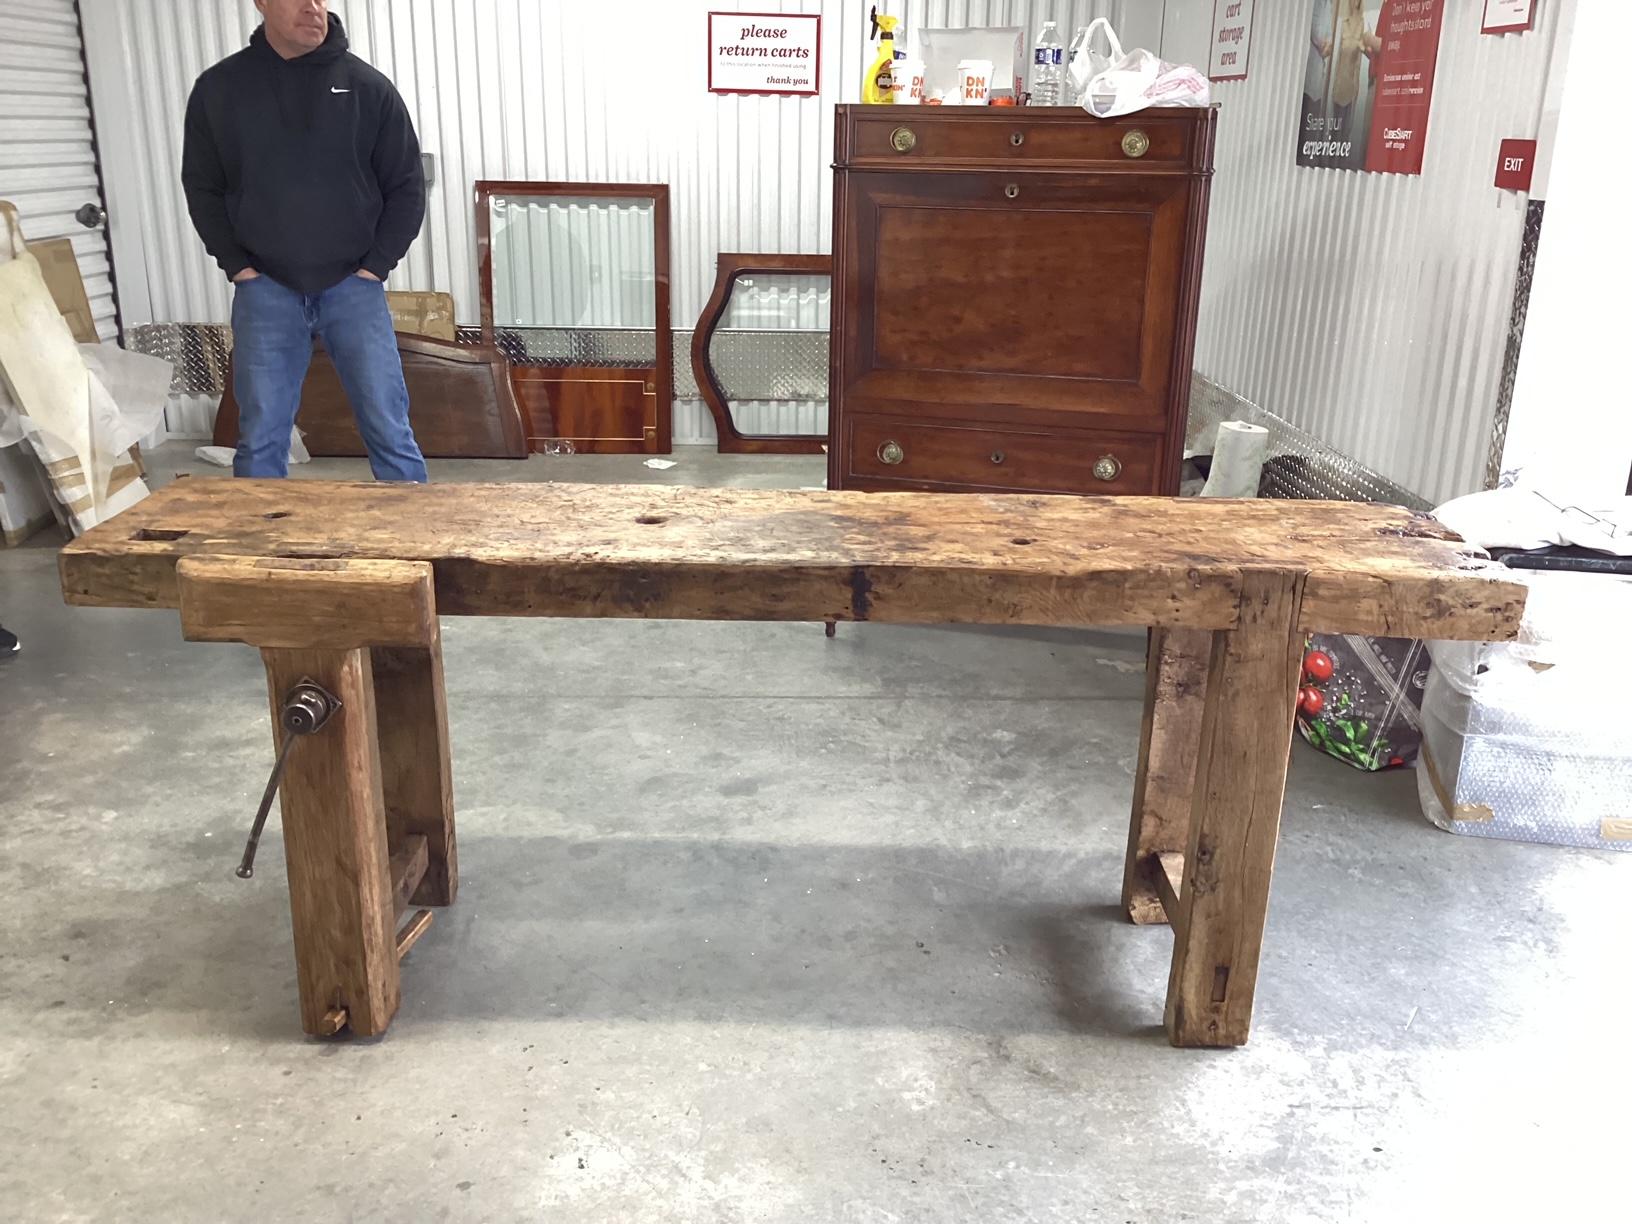 This is one incredibly aged and unique French work bench. Dating to the 1800's, this work bench is made of knotted elm and features a thick plank top over 4 rough hand hewn legs. You will find holes in the top for tools and an authentic vise. Given